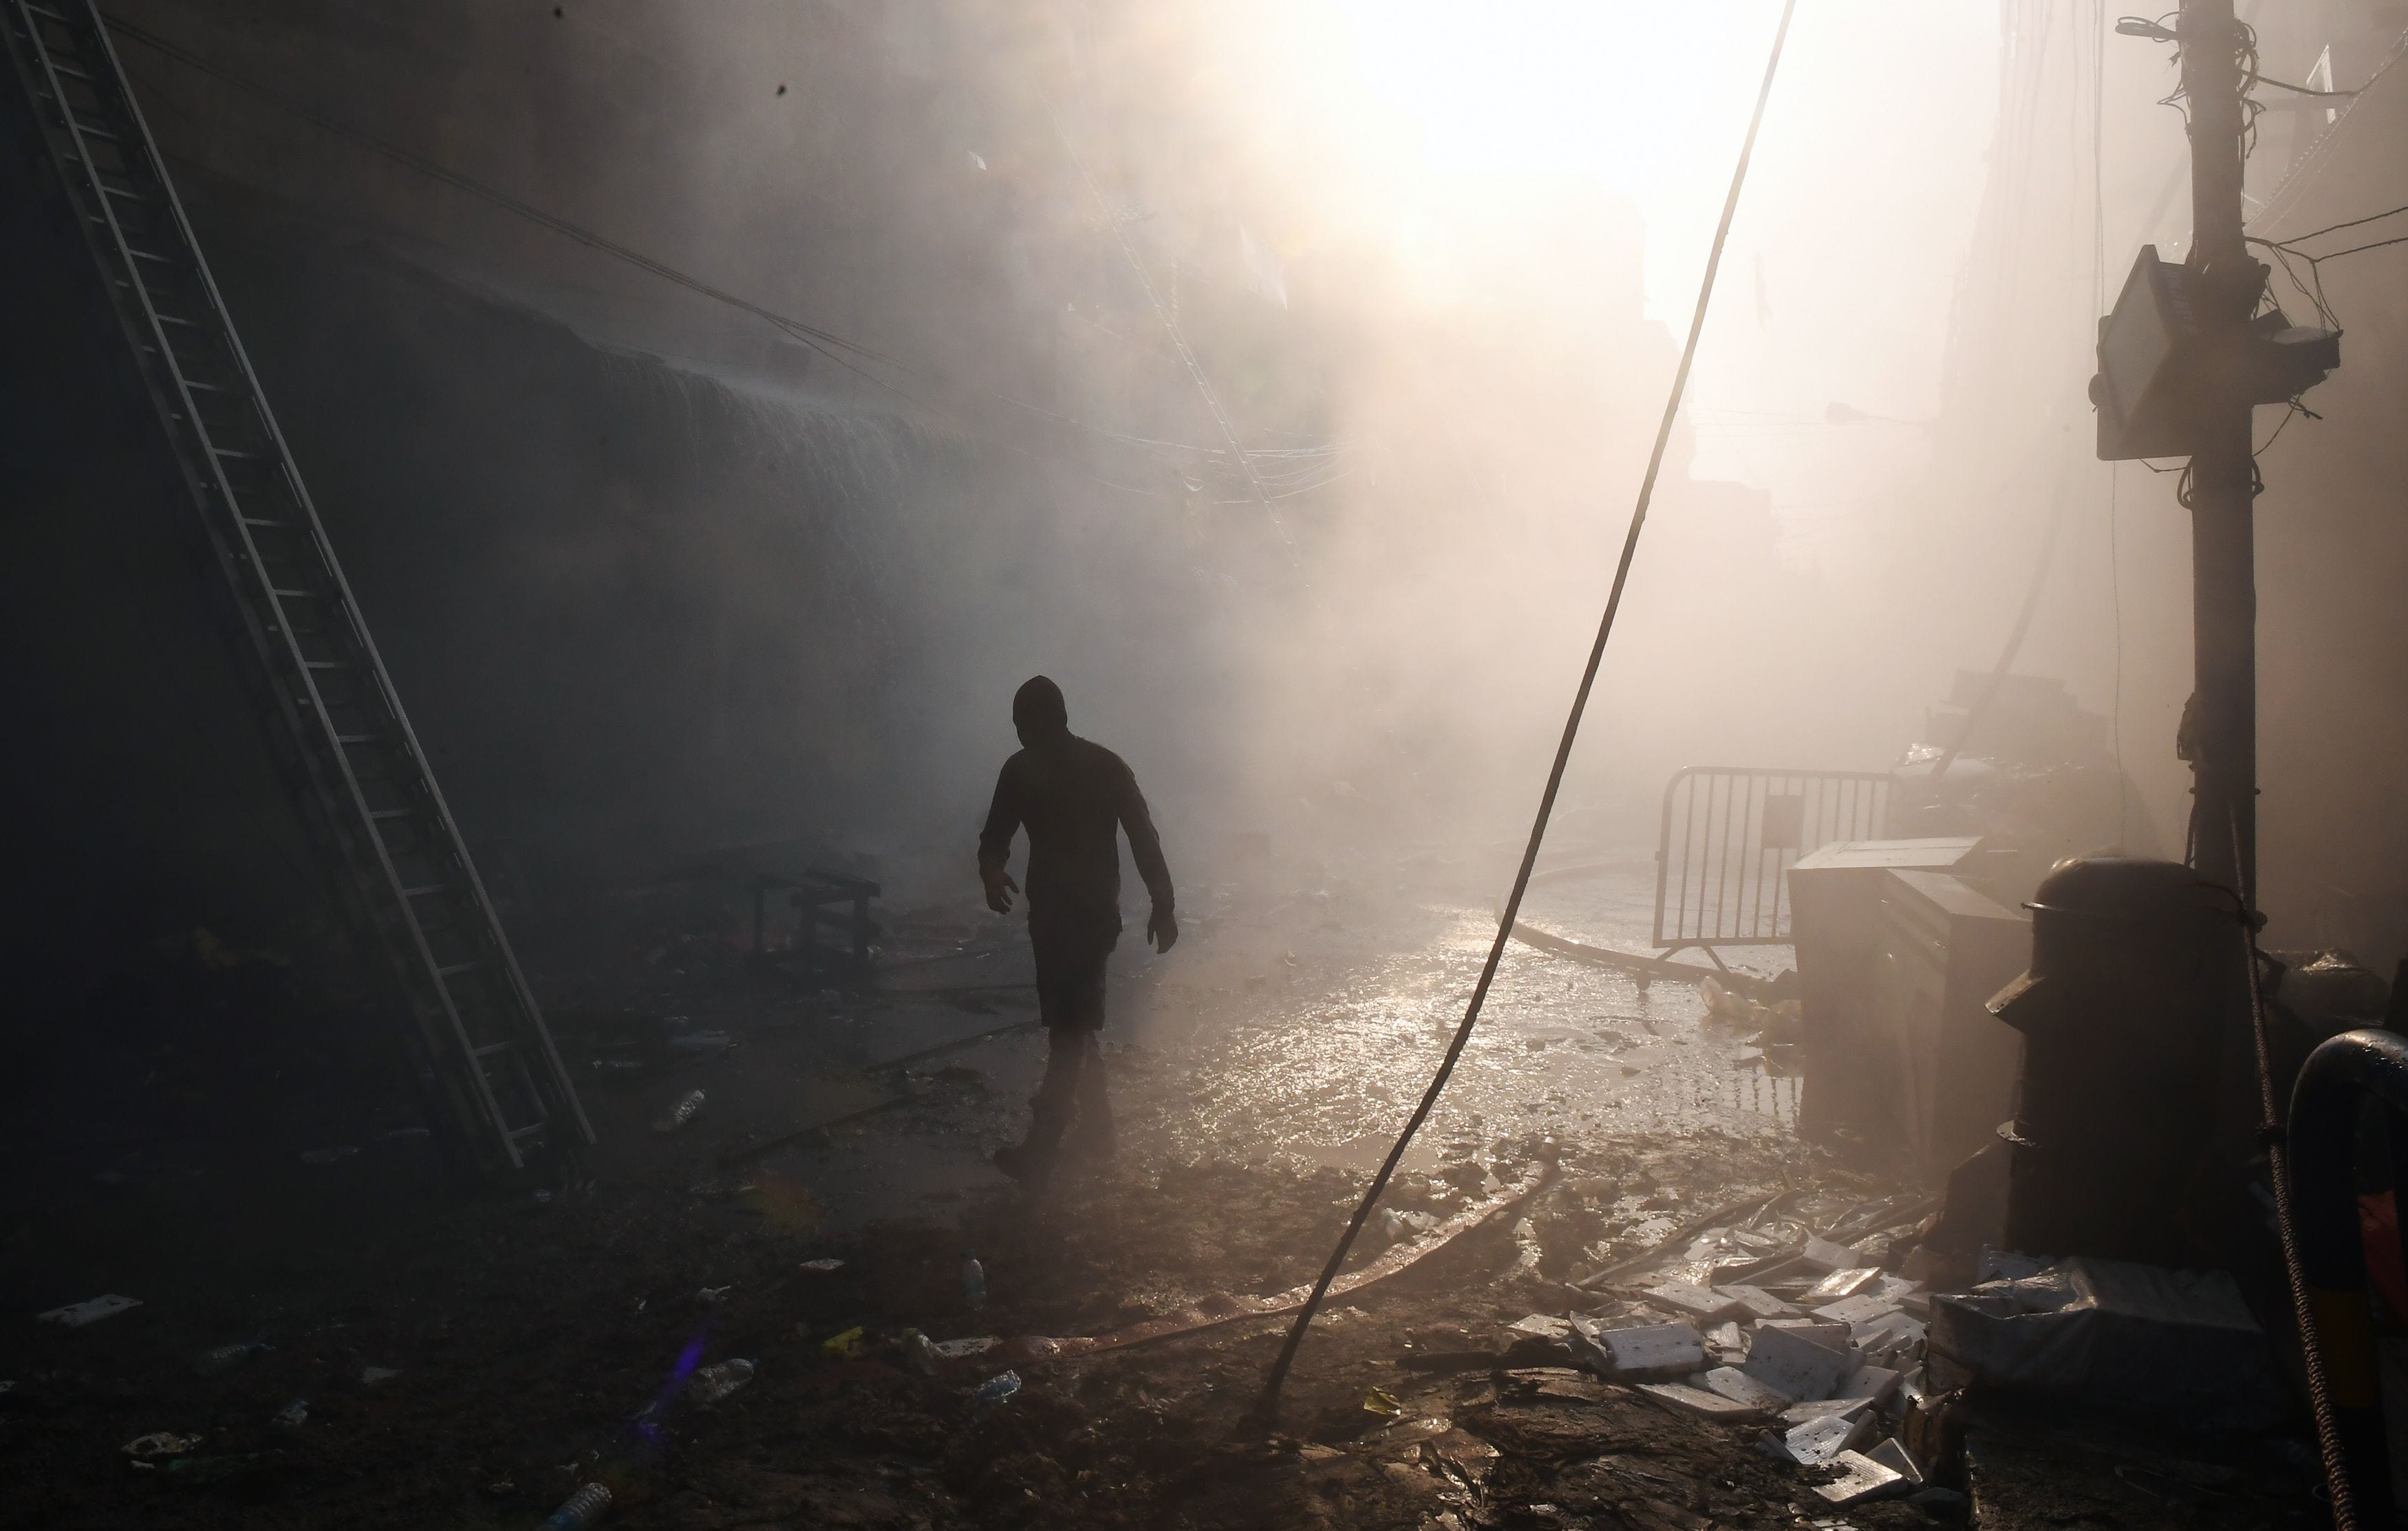 A man walks through mist from Indian firefighters spraying water to extinguish a fire at the Bagree market building in Kolkata.